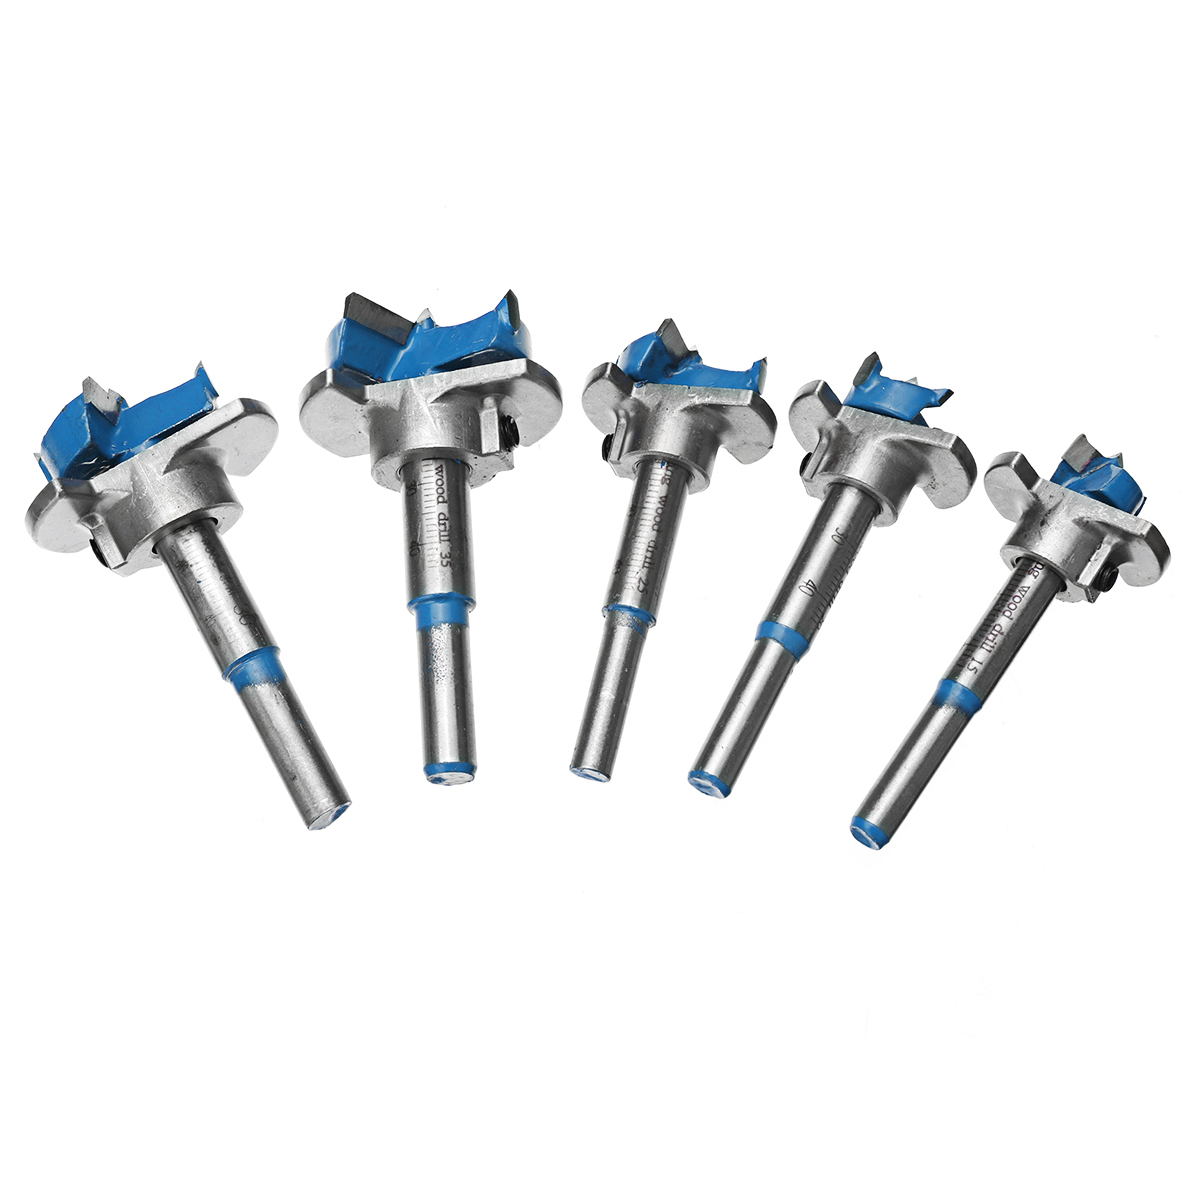 7pcs-Blue-or-Red-Woodworking-Hinge-Hole-Opener-Set-Positioning-Hole-Saw-Cutter-Drill-Bits-1615475-7